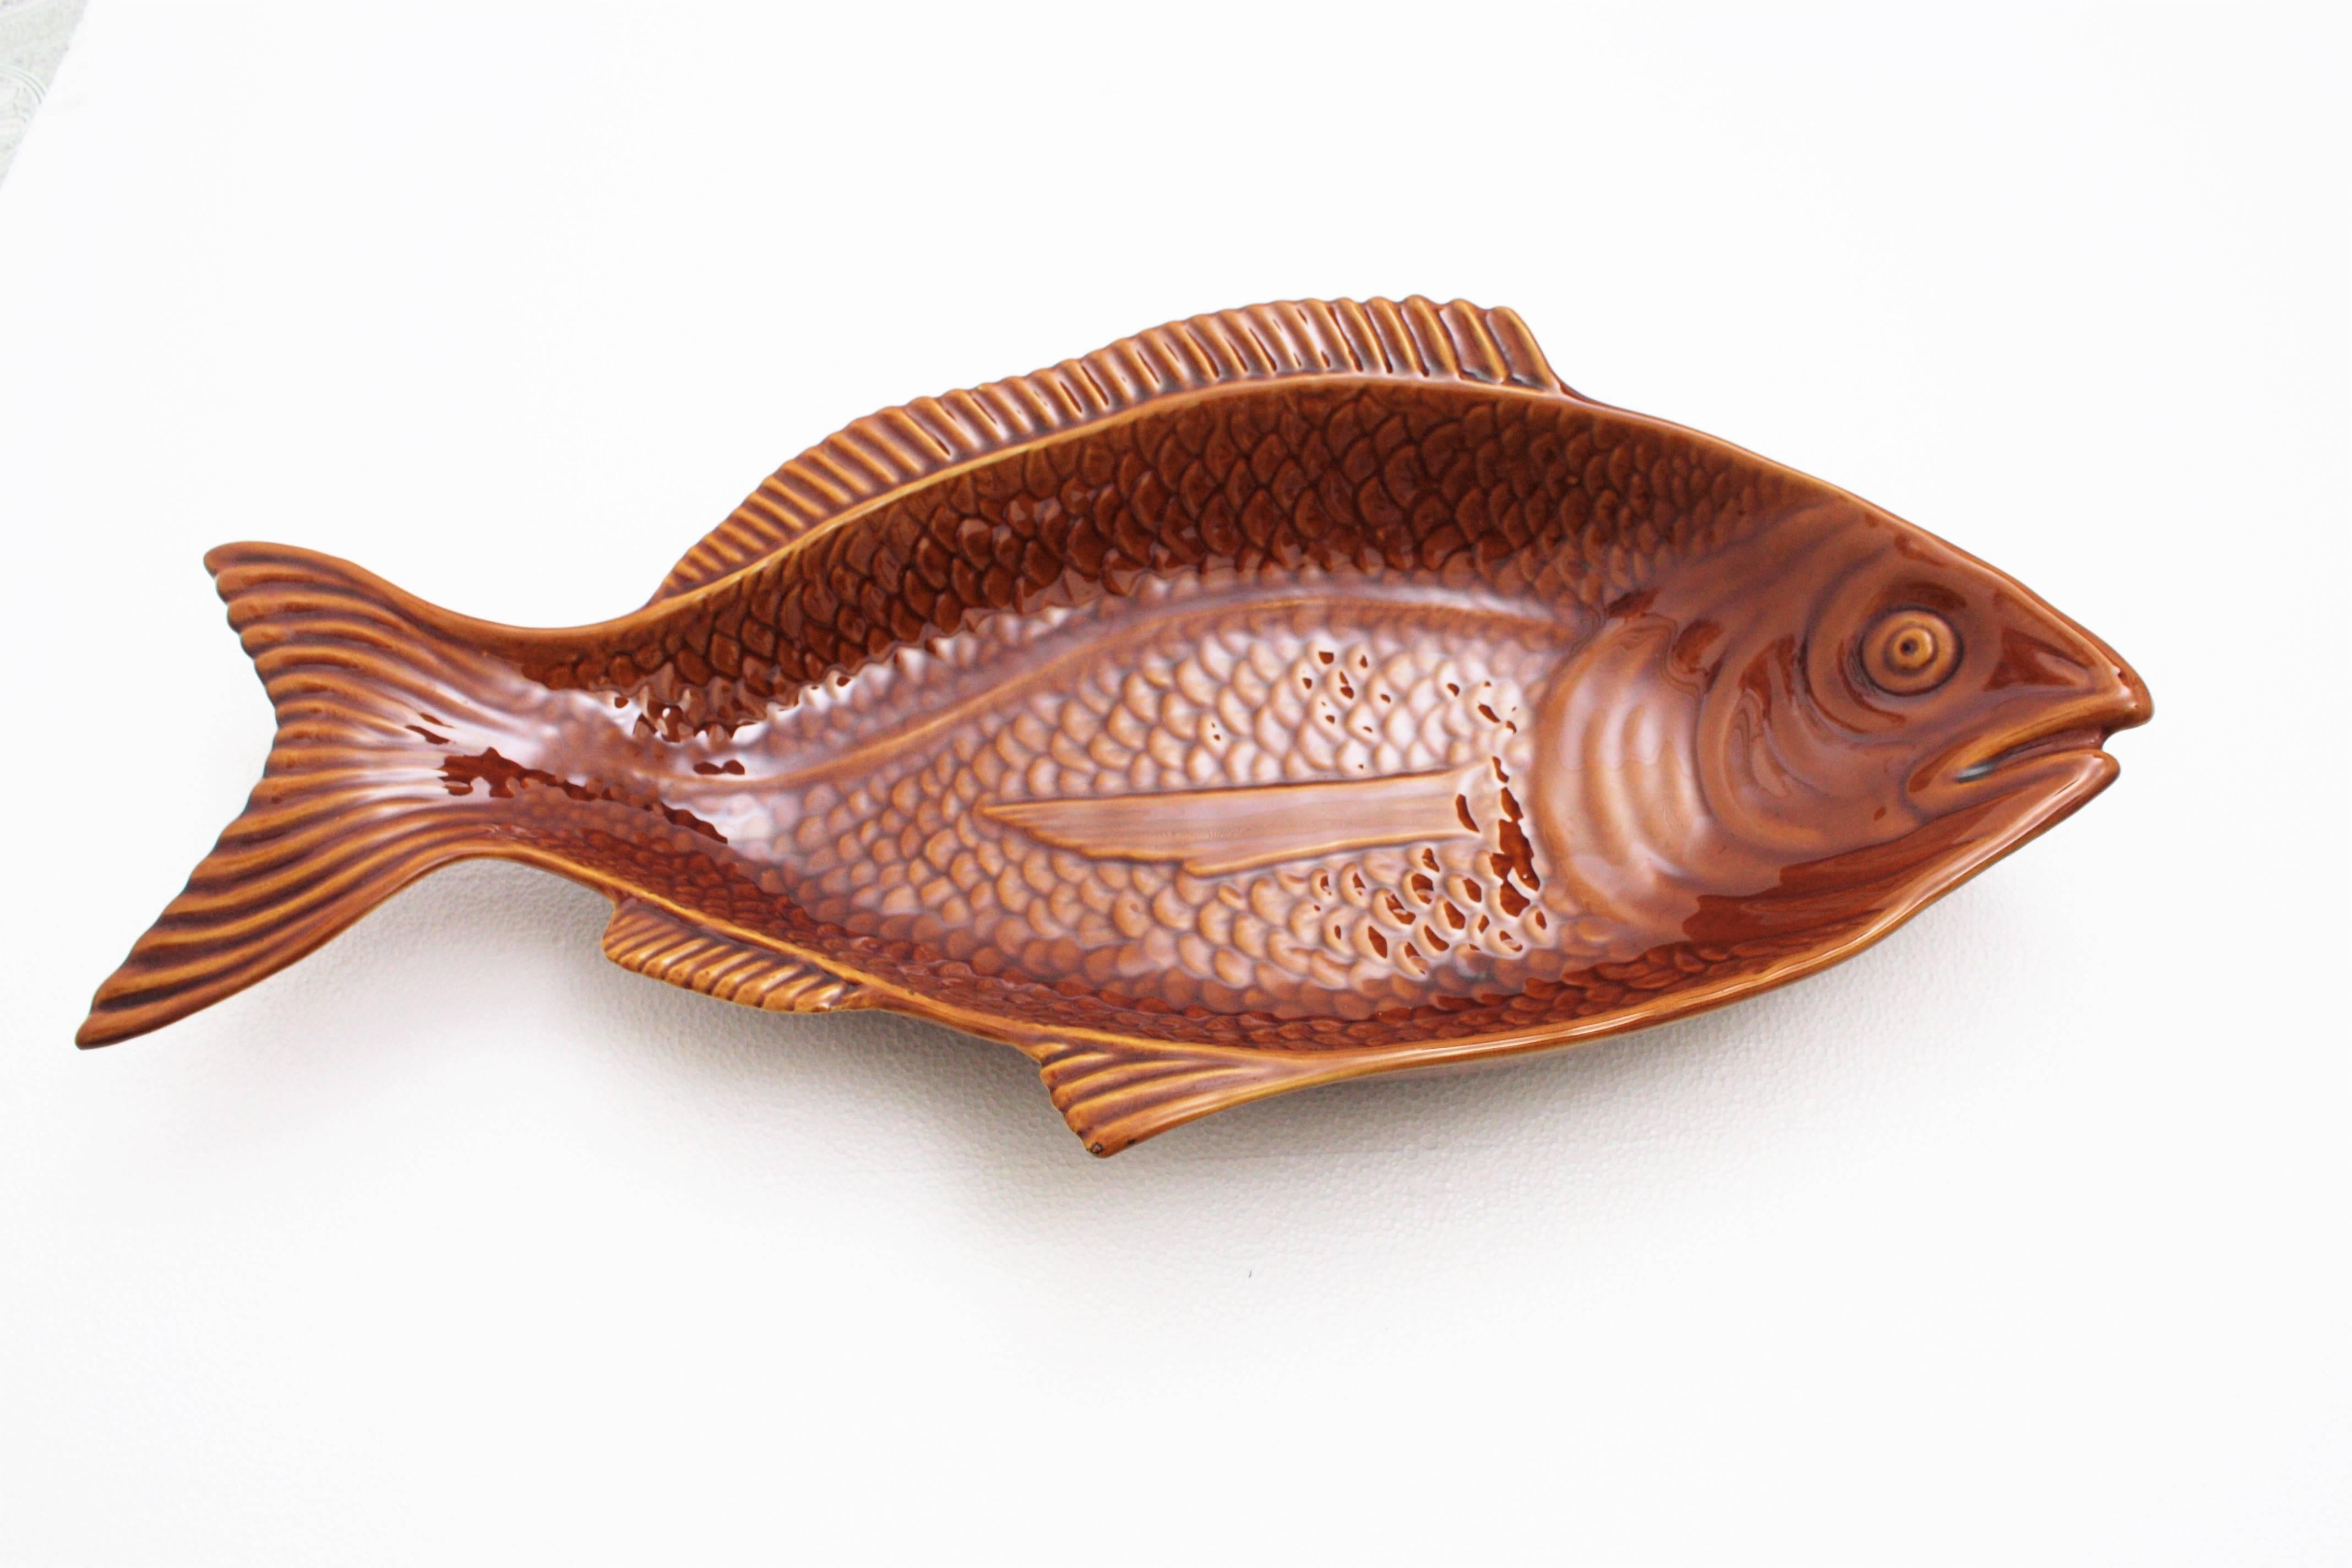 A glazed ceramic large fish platter in brown and toffee colors manufactured by Secla ceramics factory. Portugal, 1960s.
A very interesting piece due to its very large size.
Useful as serving platter, centerpiece but also lovely to use it to